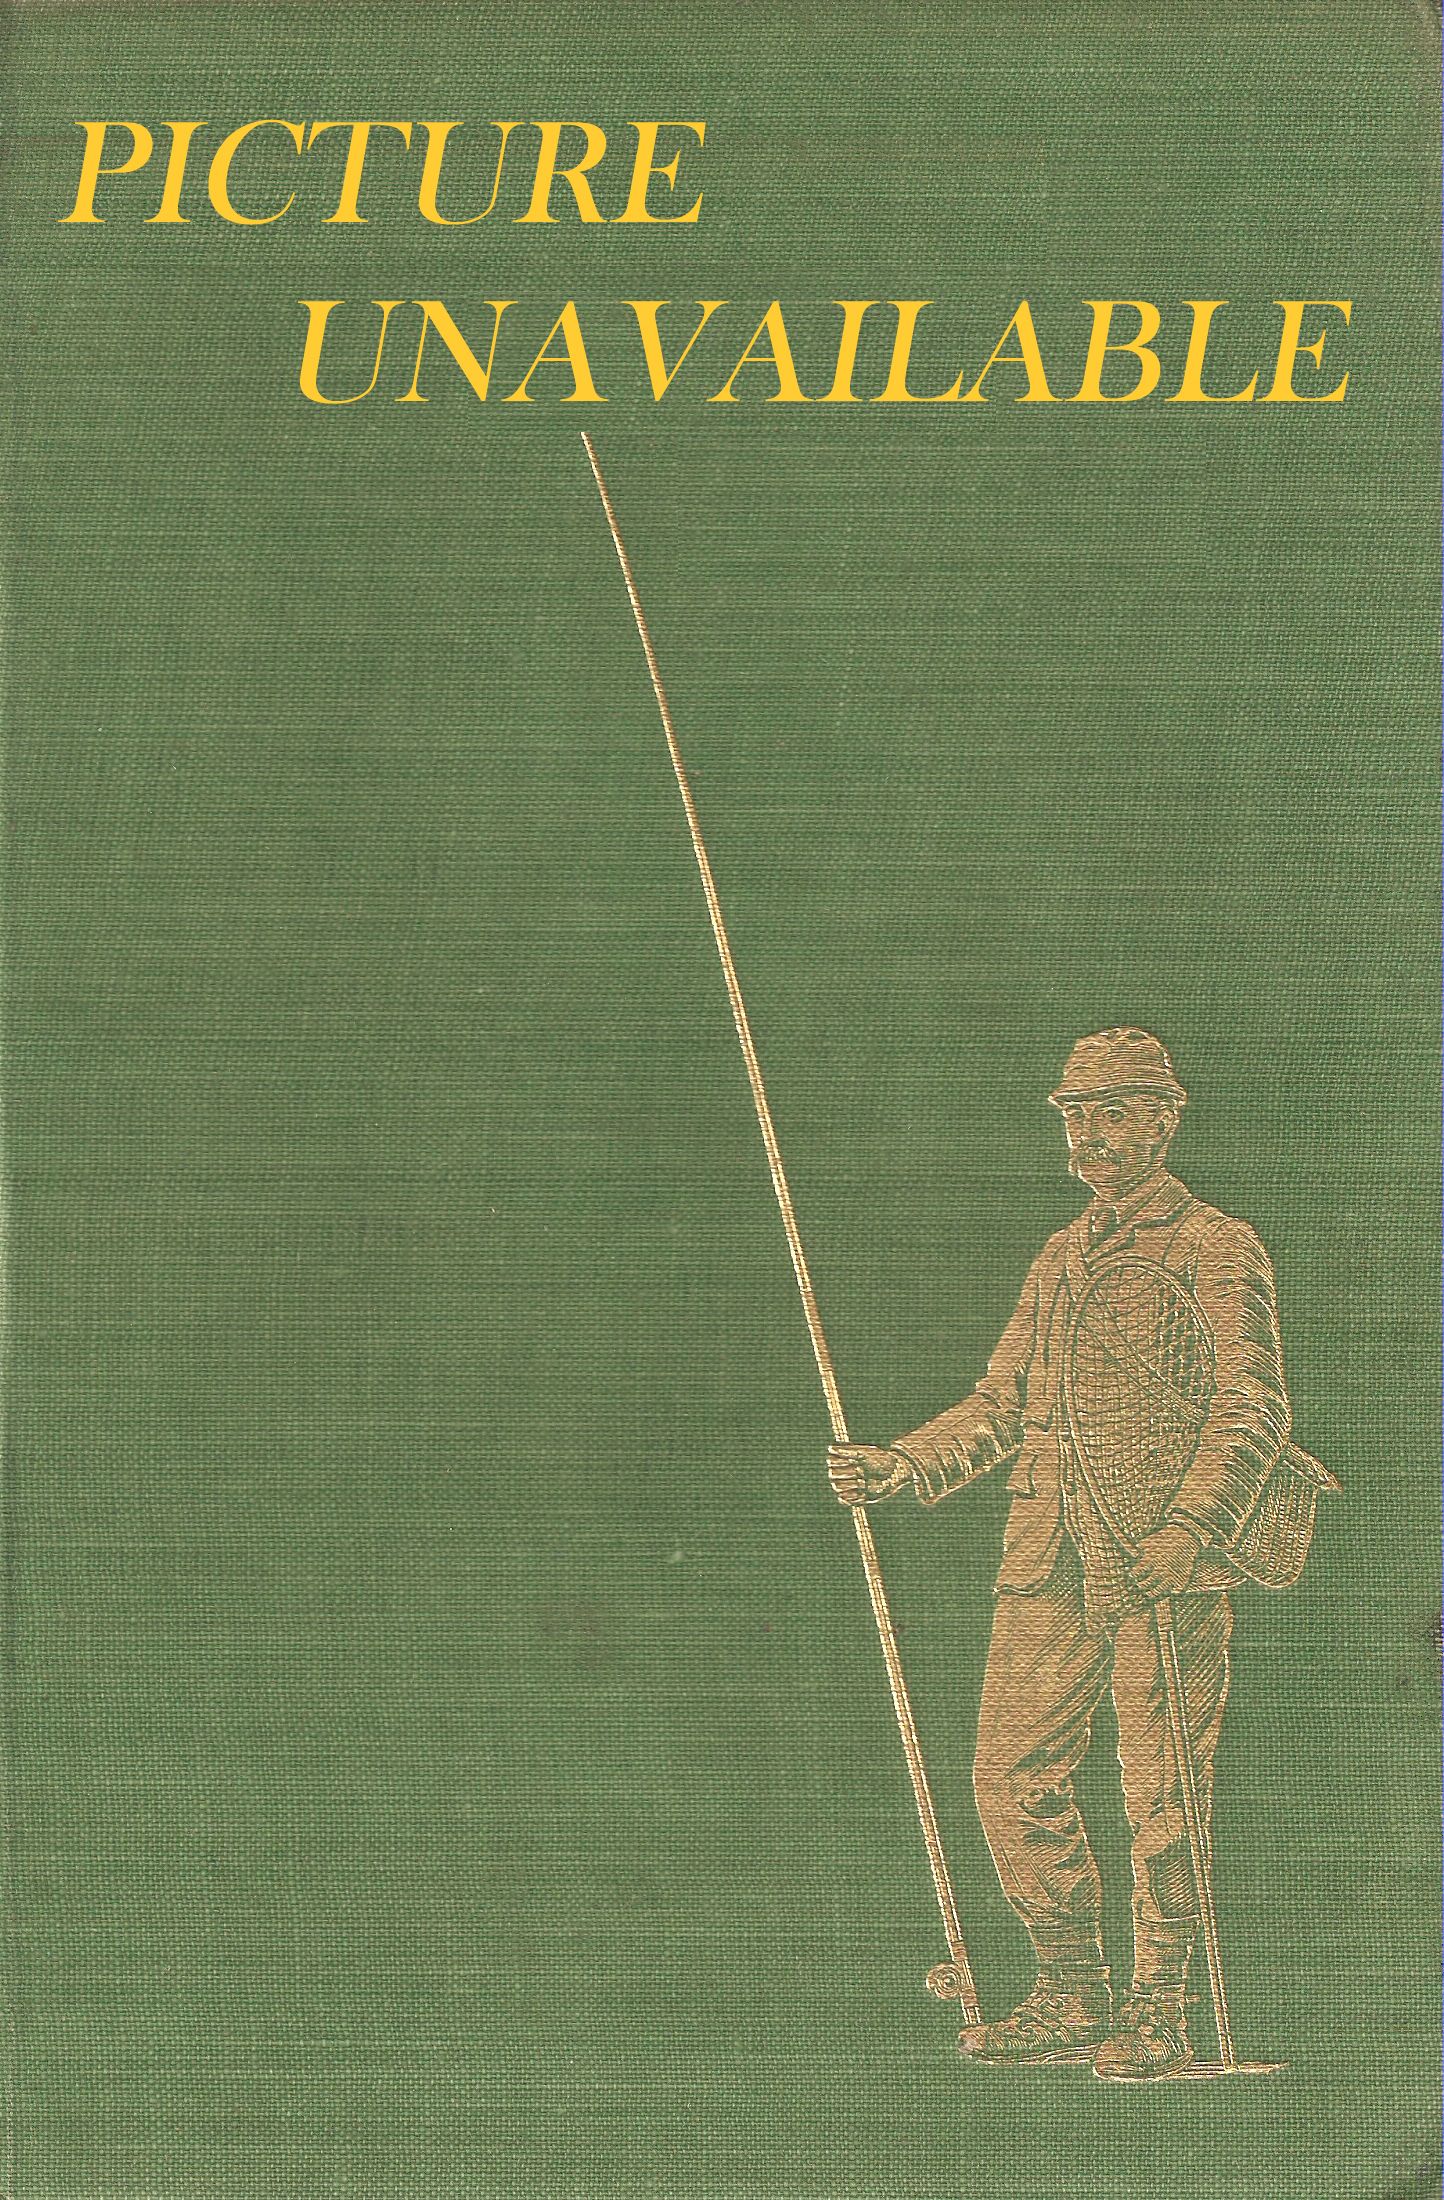 THE ANGLER'S CAST. By Capt. T.L. Edwards and Eric Horsfall Turner.